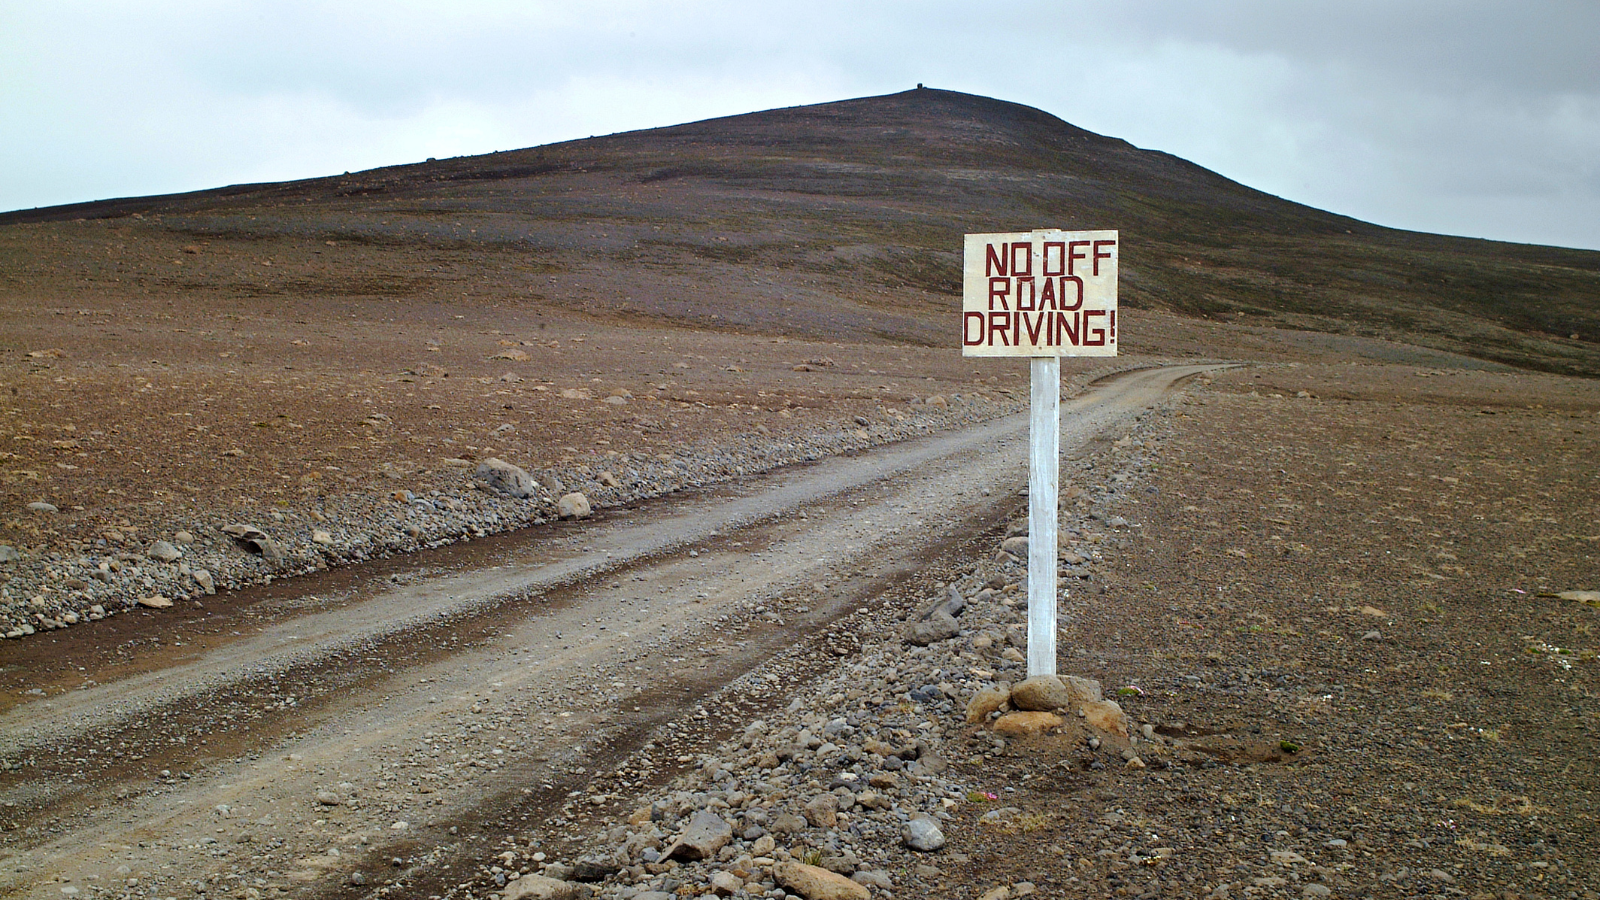 View of a rocky track in Iceland’s Highlands with a sign warning against off-road driving.